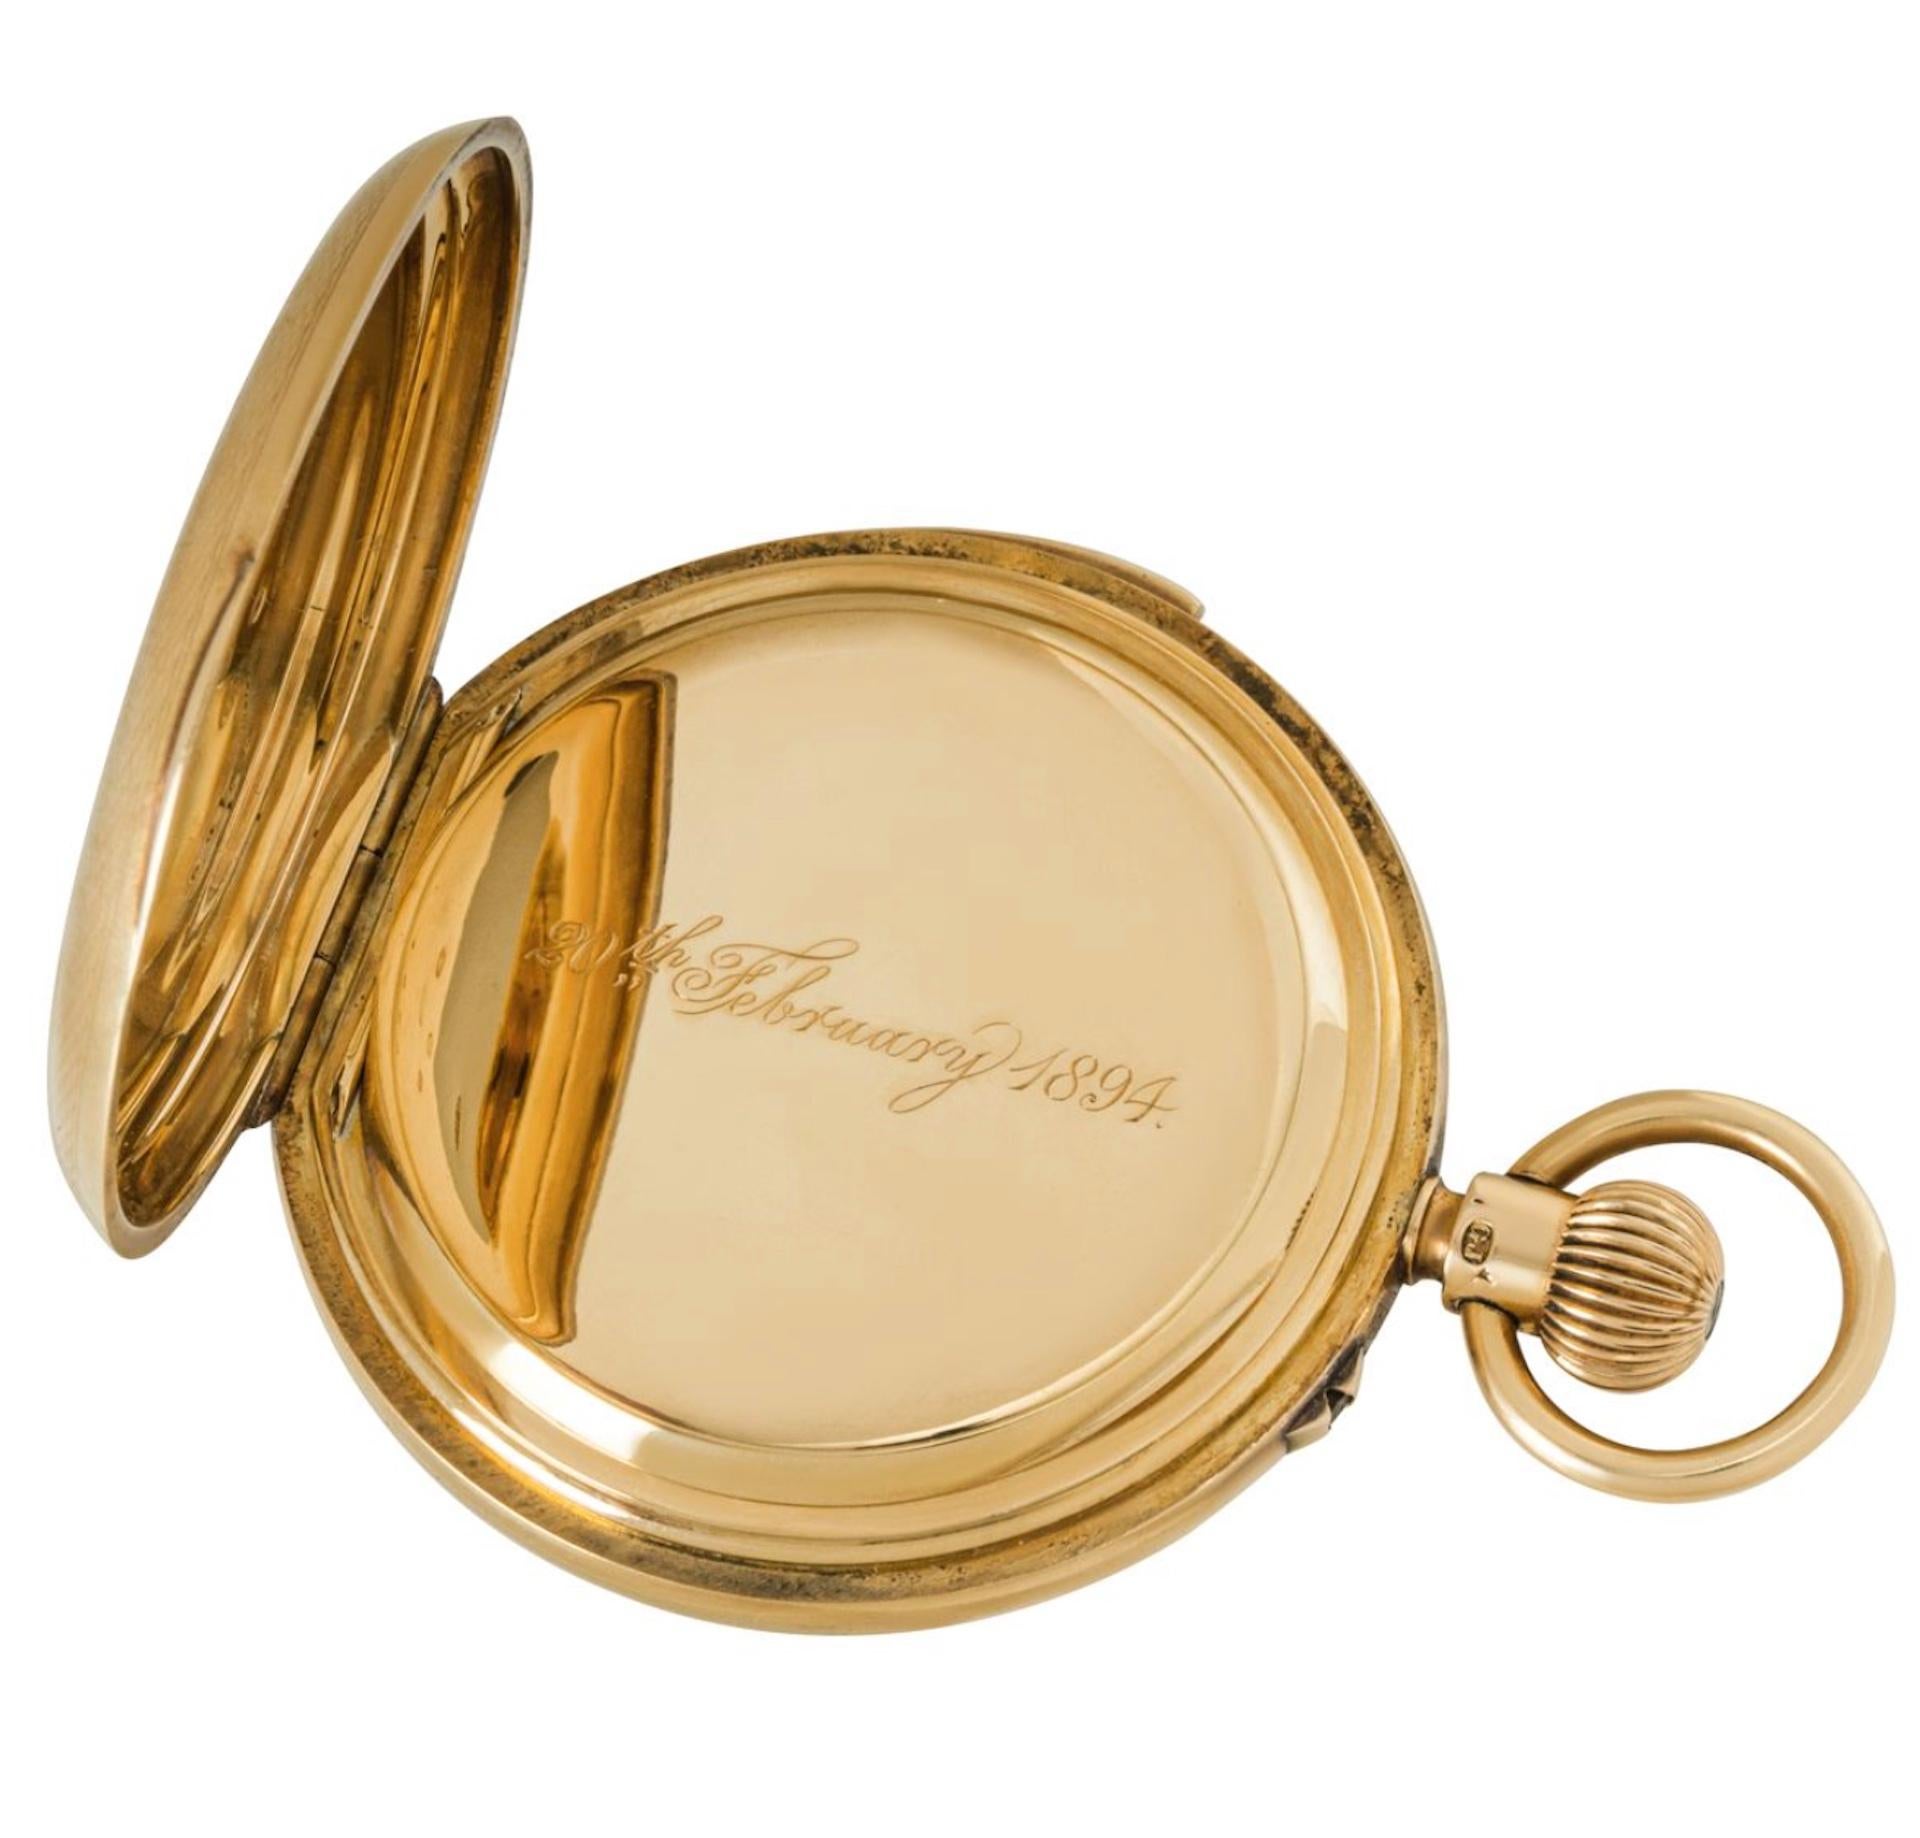 jacob and co pocket watch